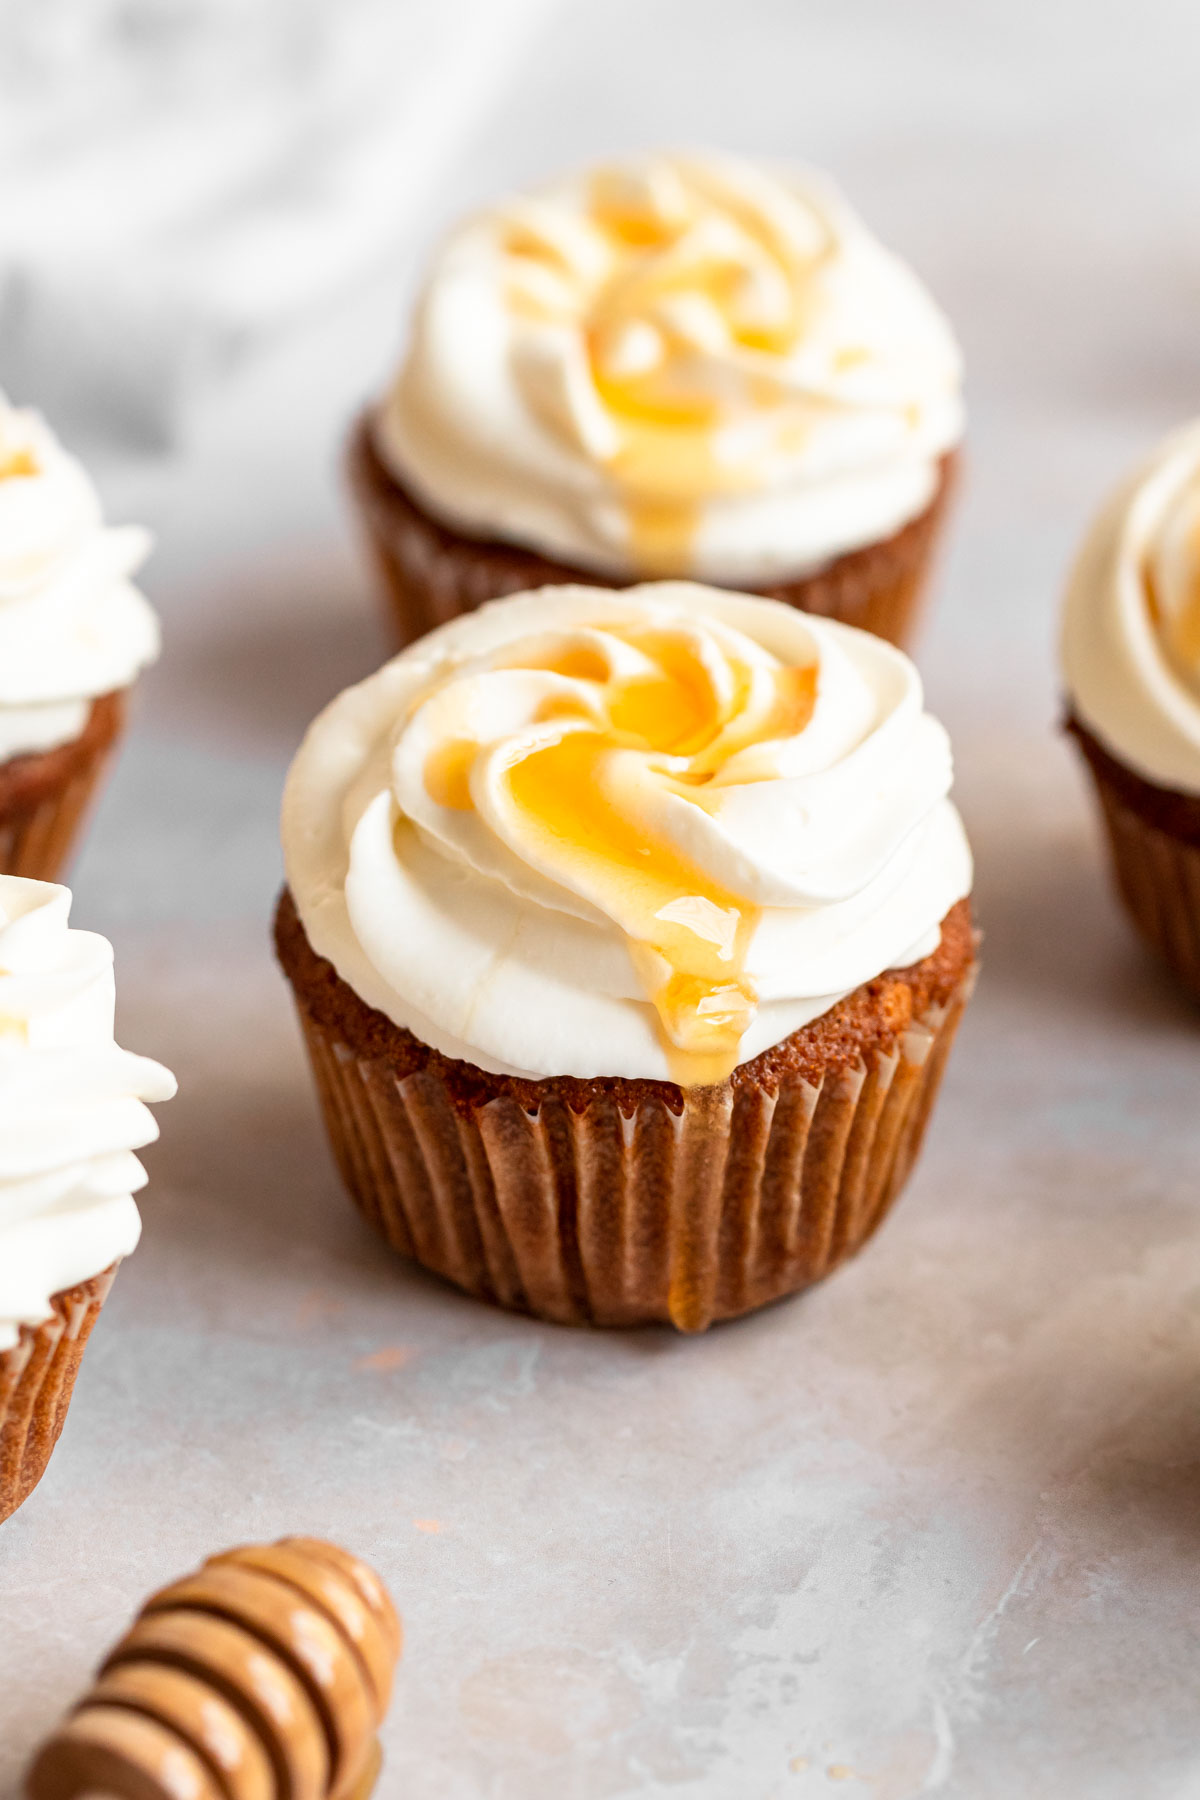 Honey dripping from cupcakes.